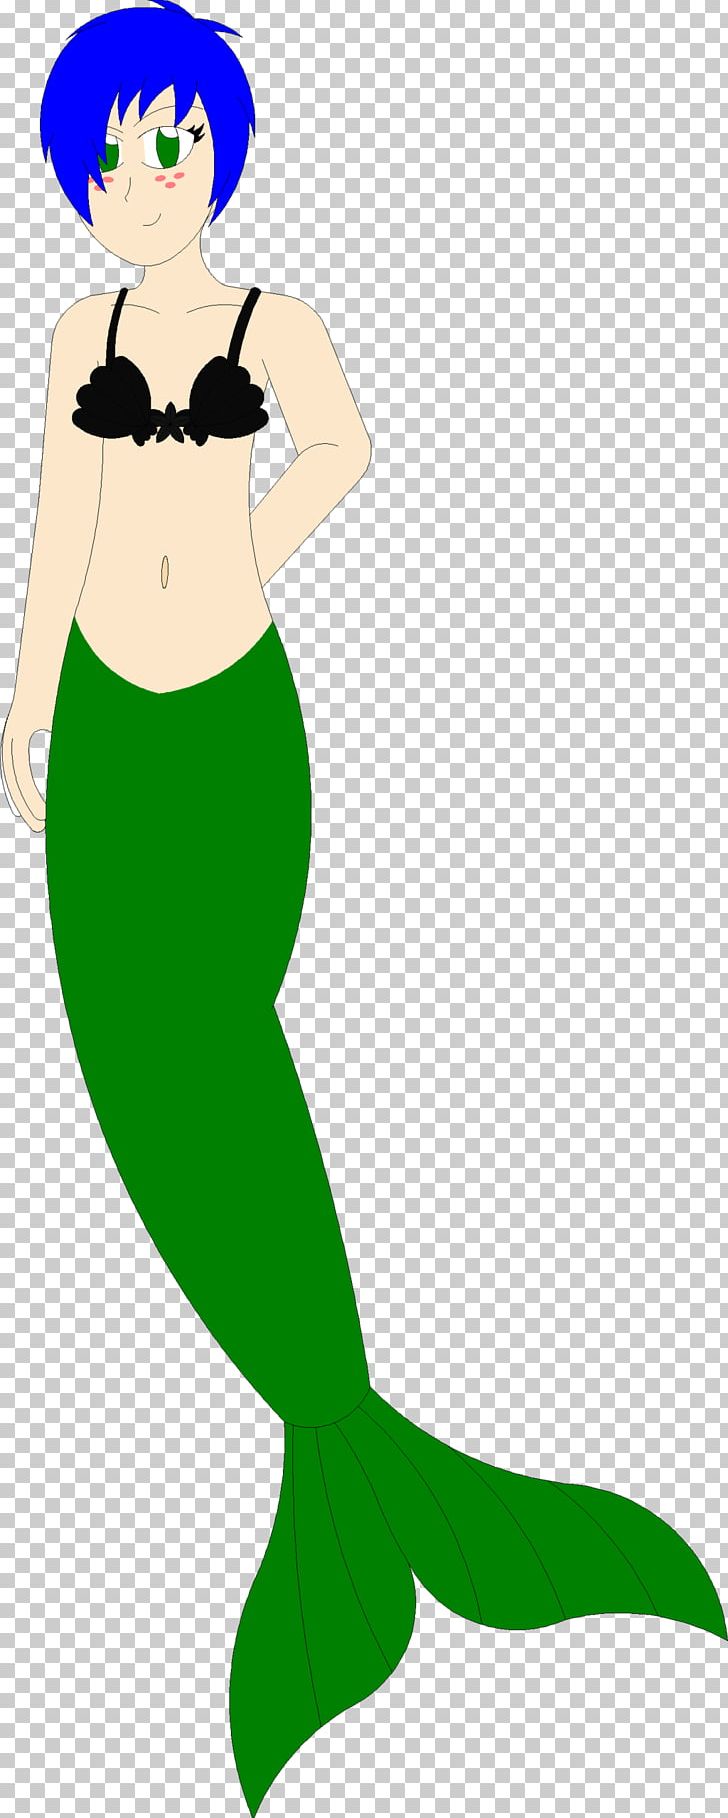 Mermaid Cartoon Tail Legendary Creature PNG, Clipart, Cartoon, Character, Fantasy, Fiction, Fictional Character Free PNG Download